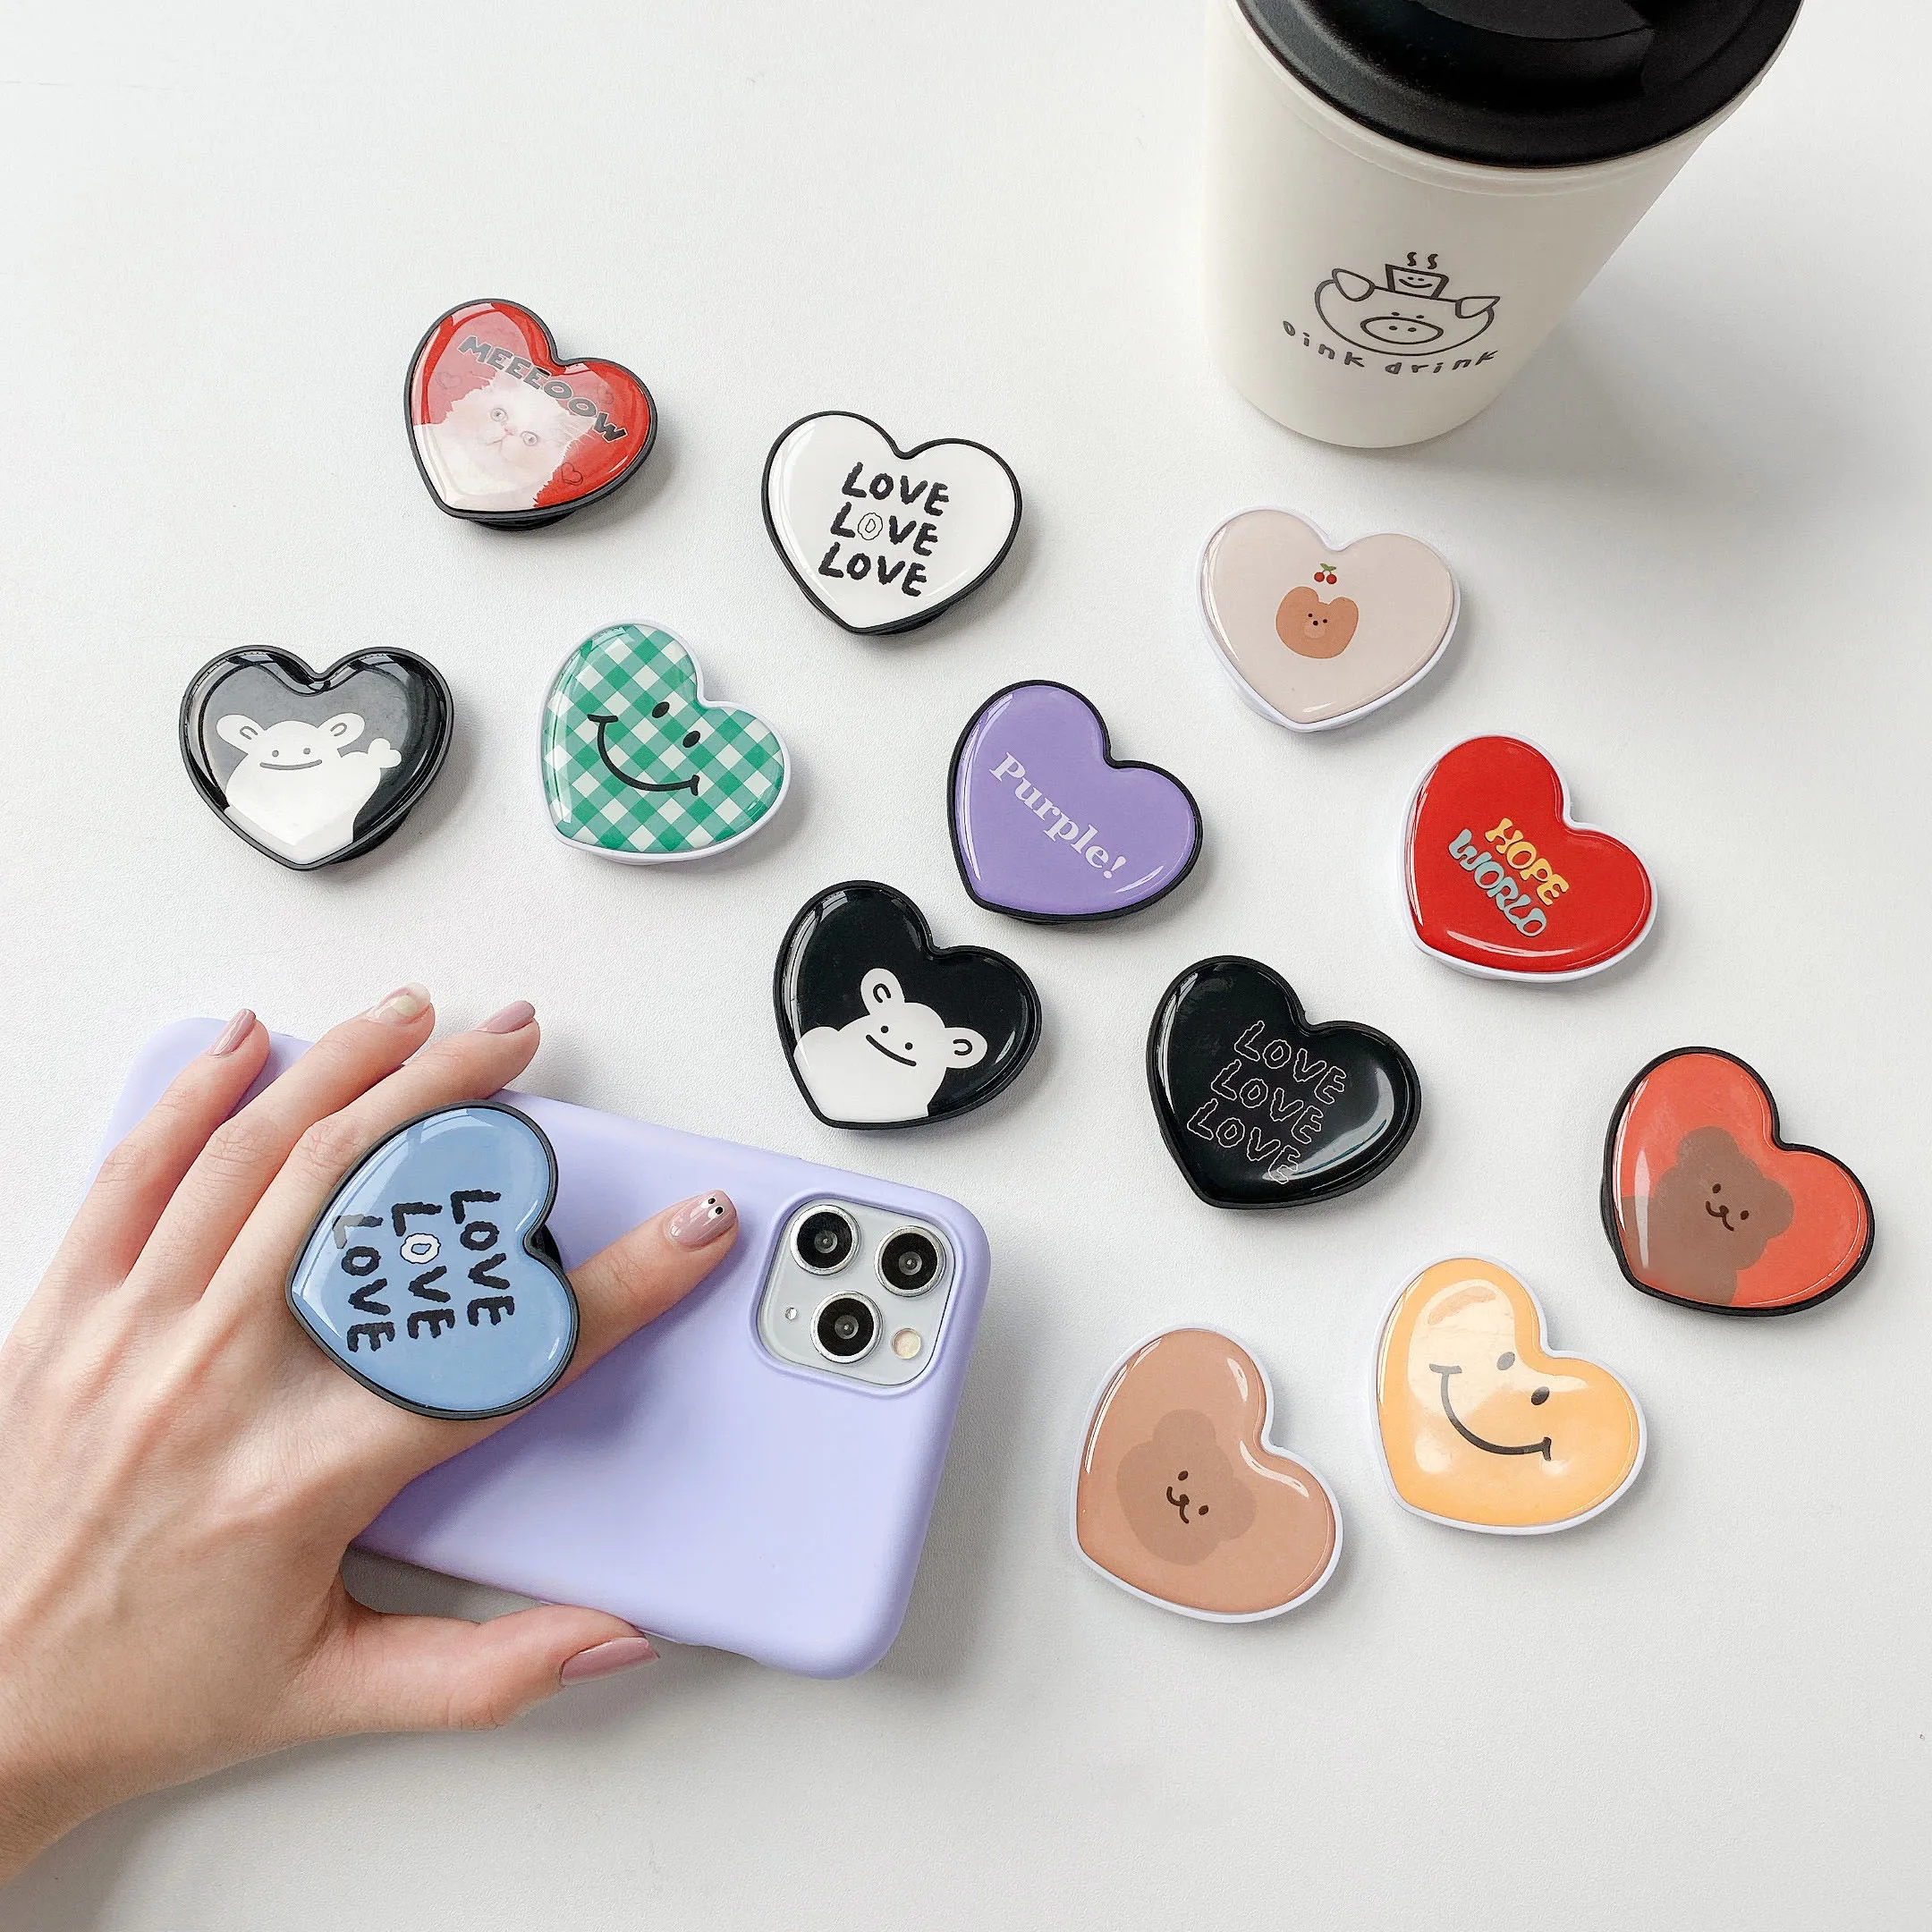 

Factory Price Wholesale Heart-shaped Mobile Holder Custom Logo With Epoxy Resin Phone Grip Cell Phone Stand For Phone Sockets, White/black/custom